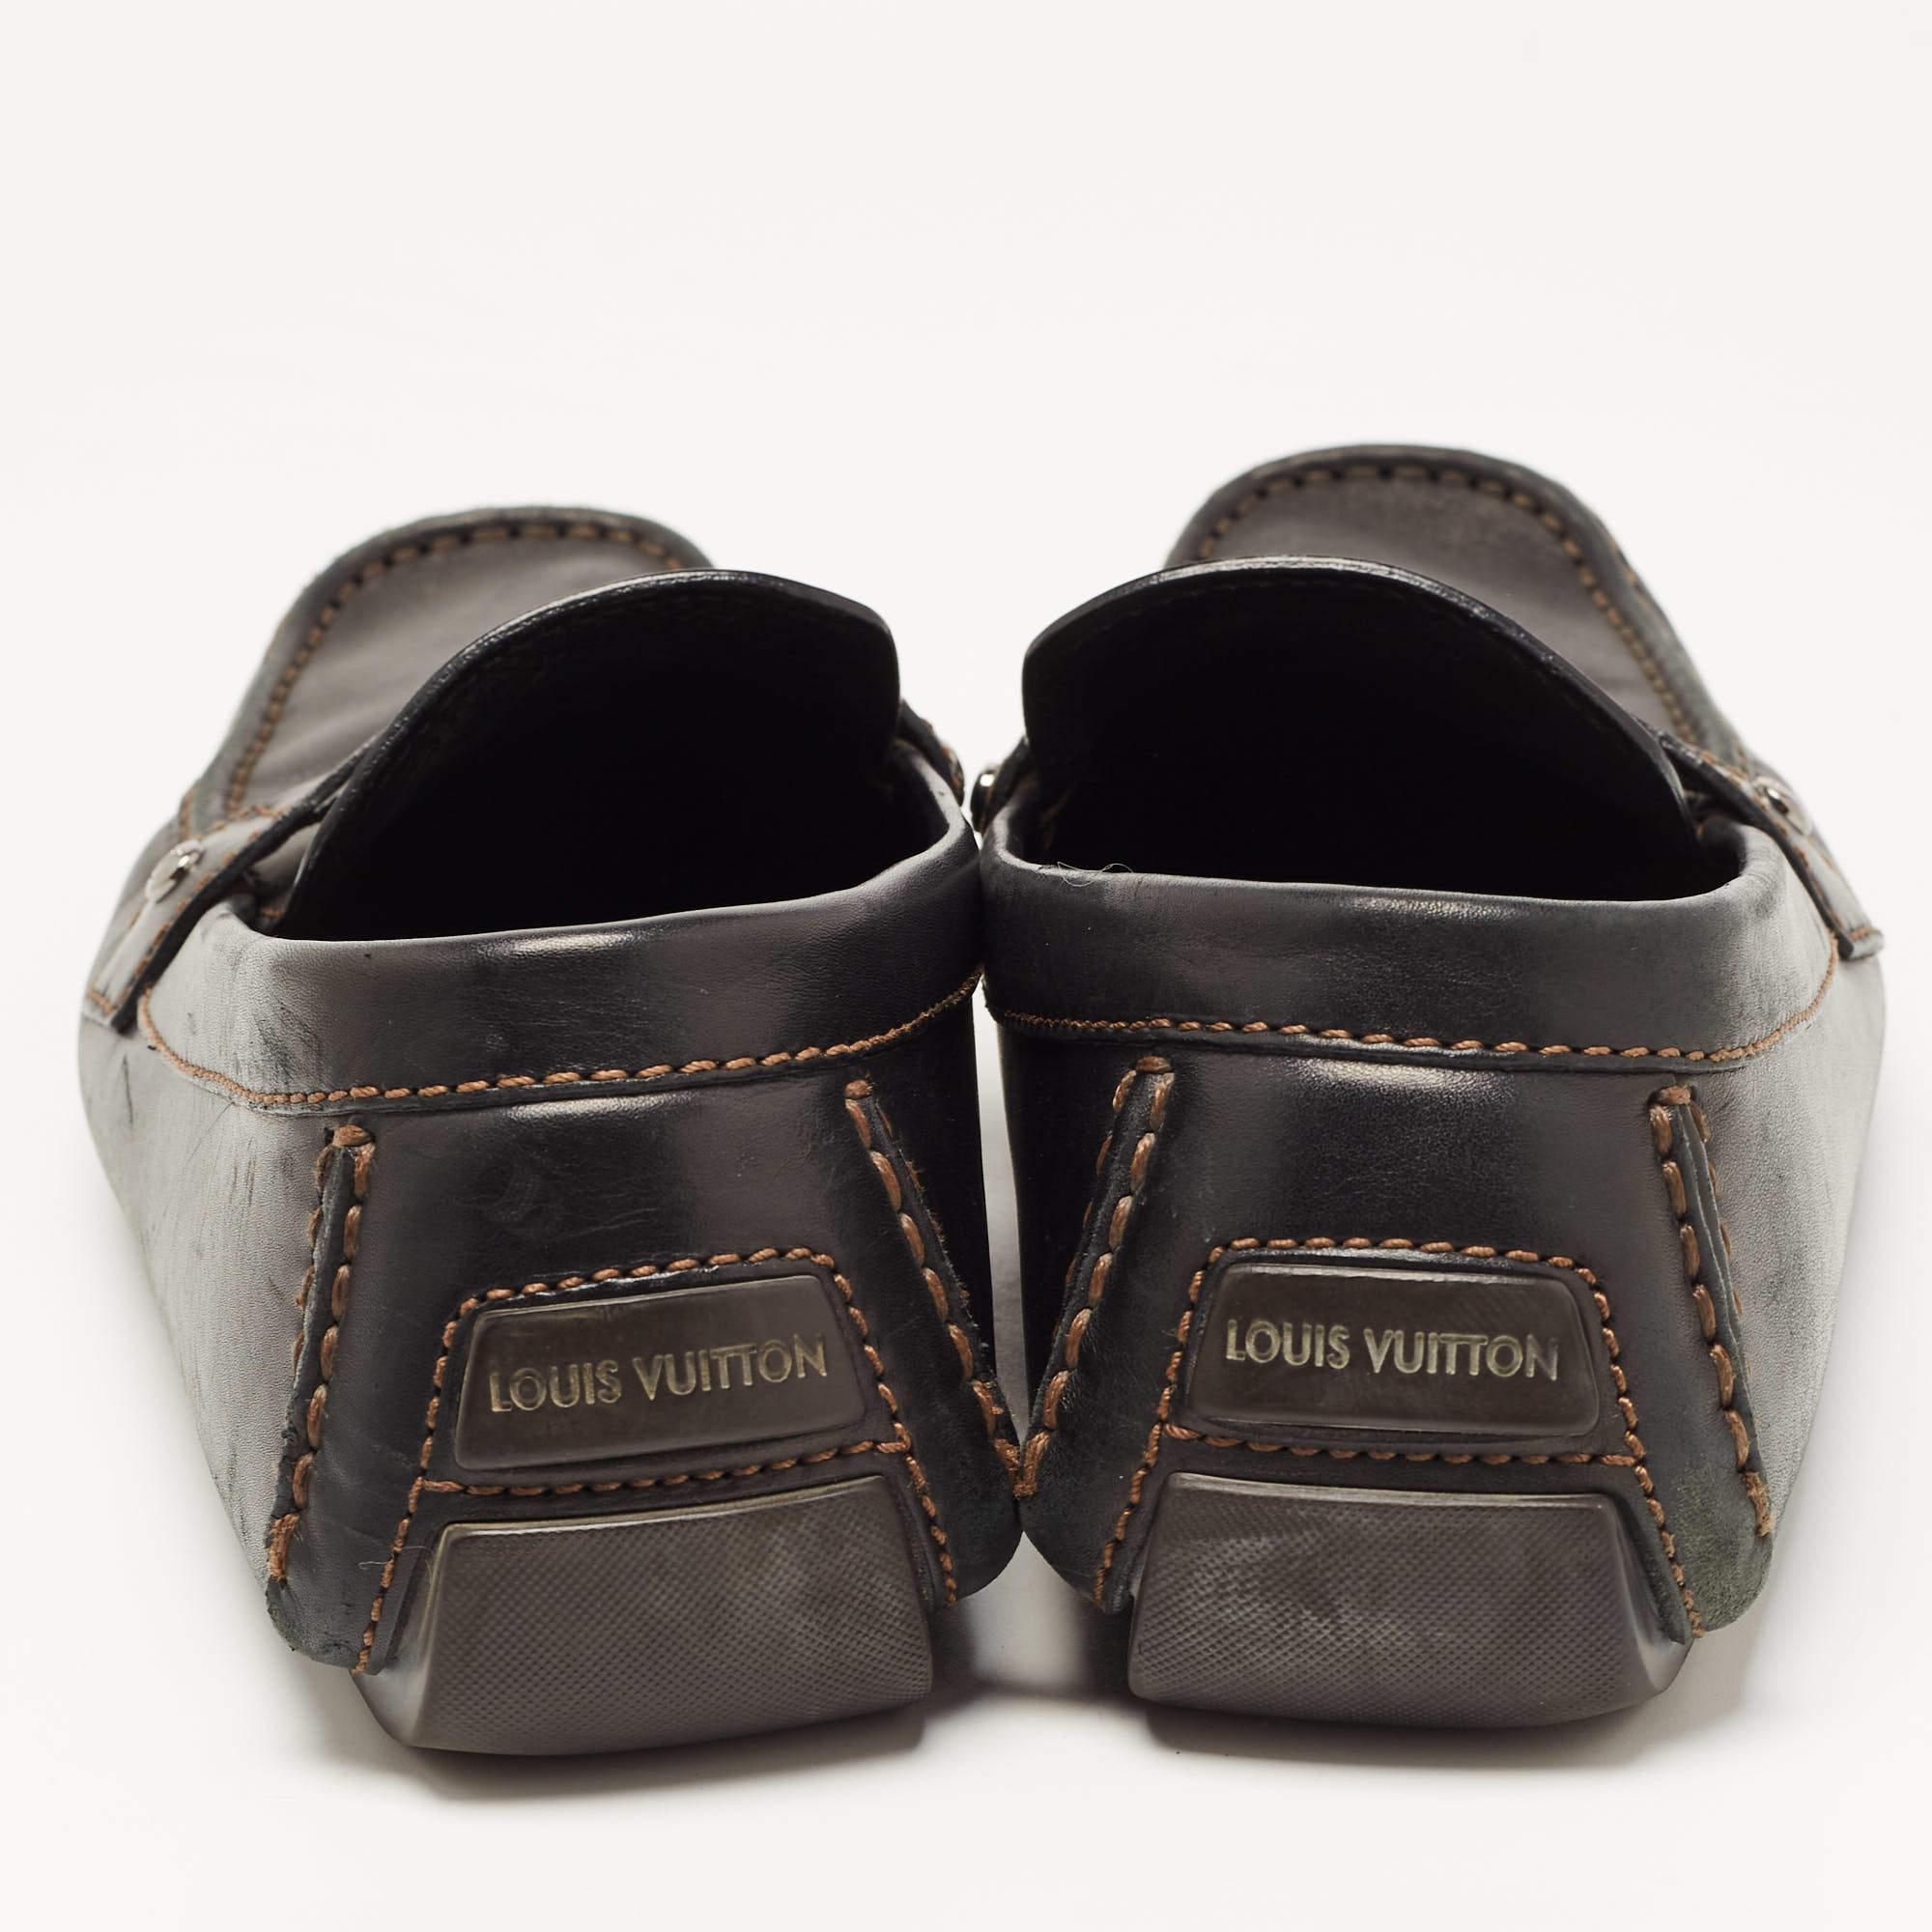 Let this comfortable pair be your first choice when you're out for a long day. These LV loafers have well-sewn uppers beautifully set on durable soles.

